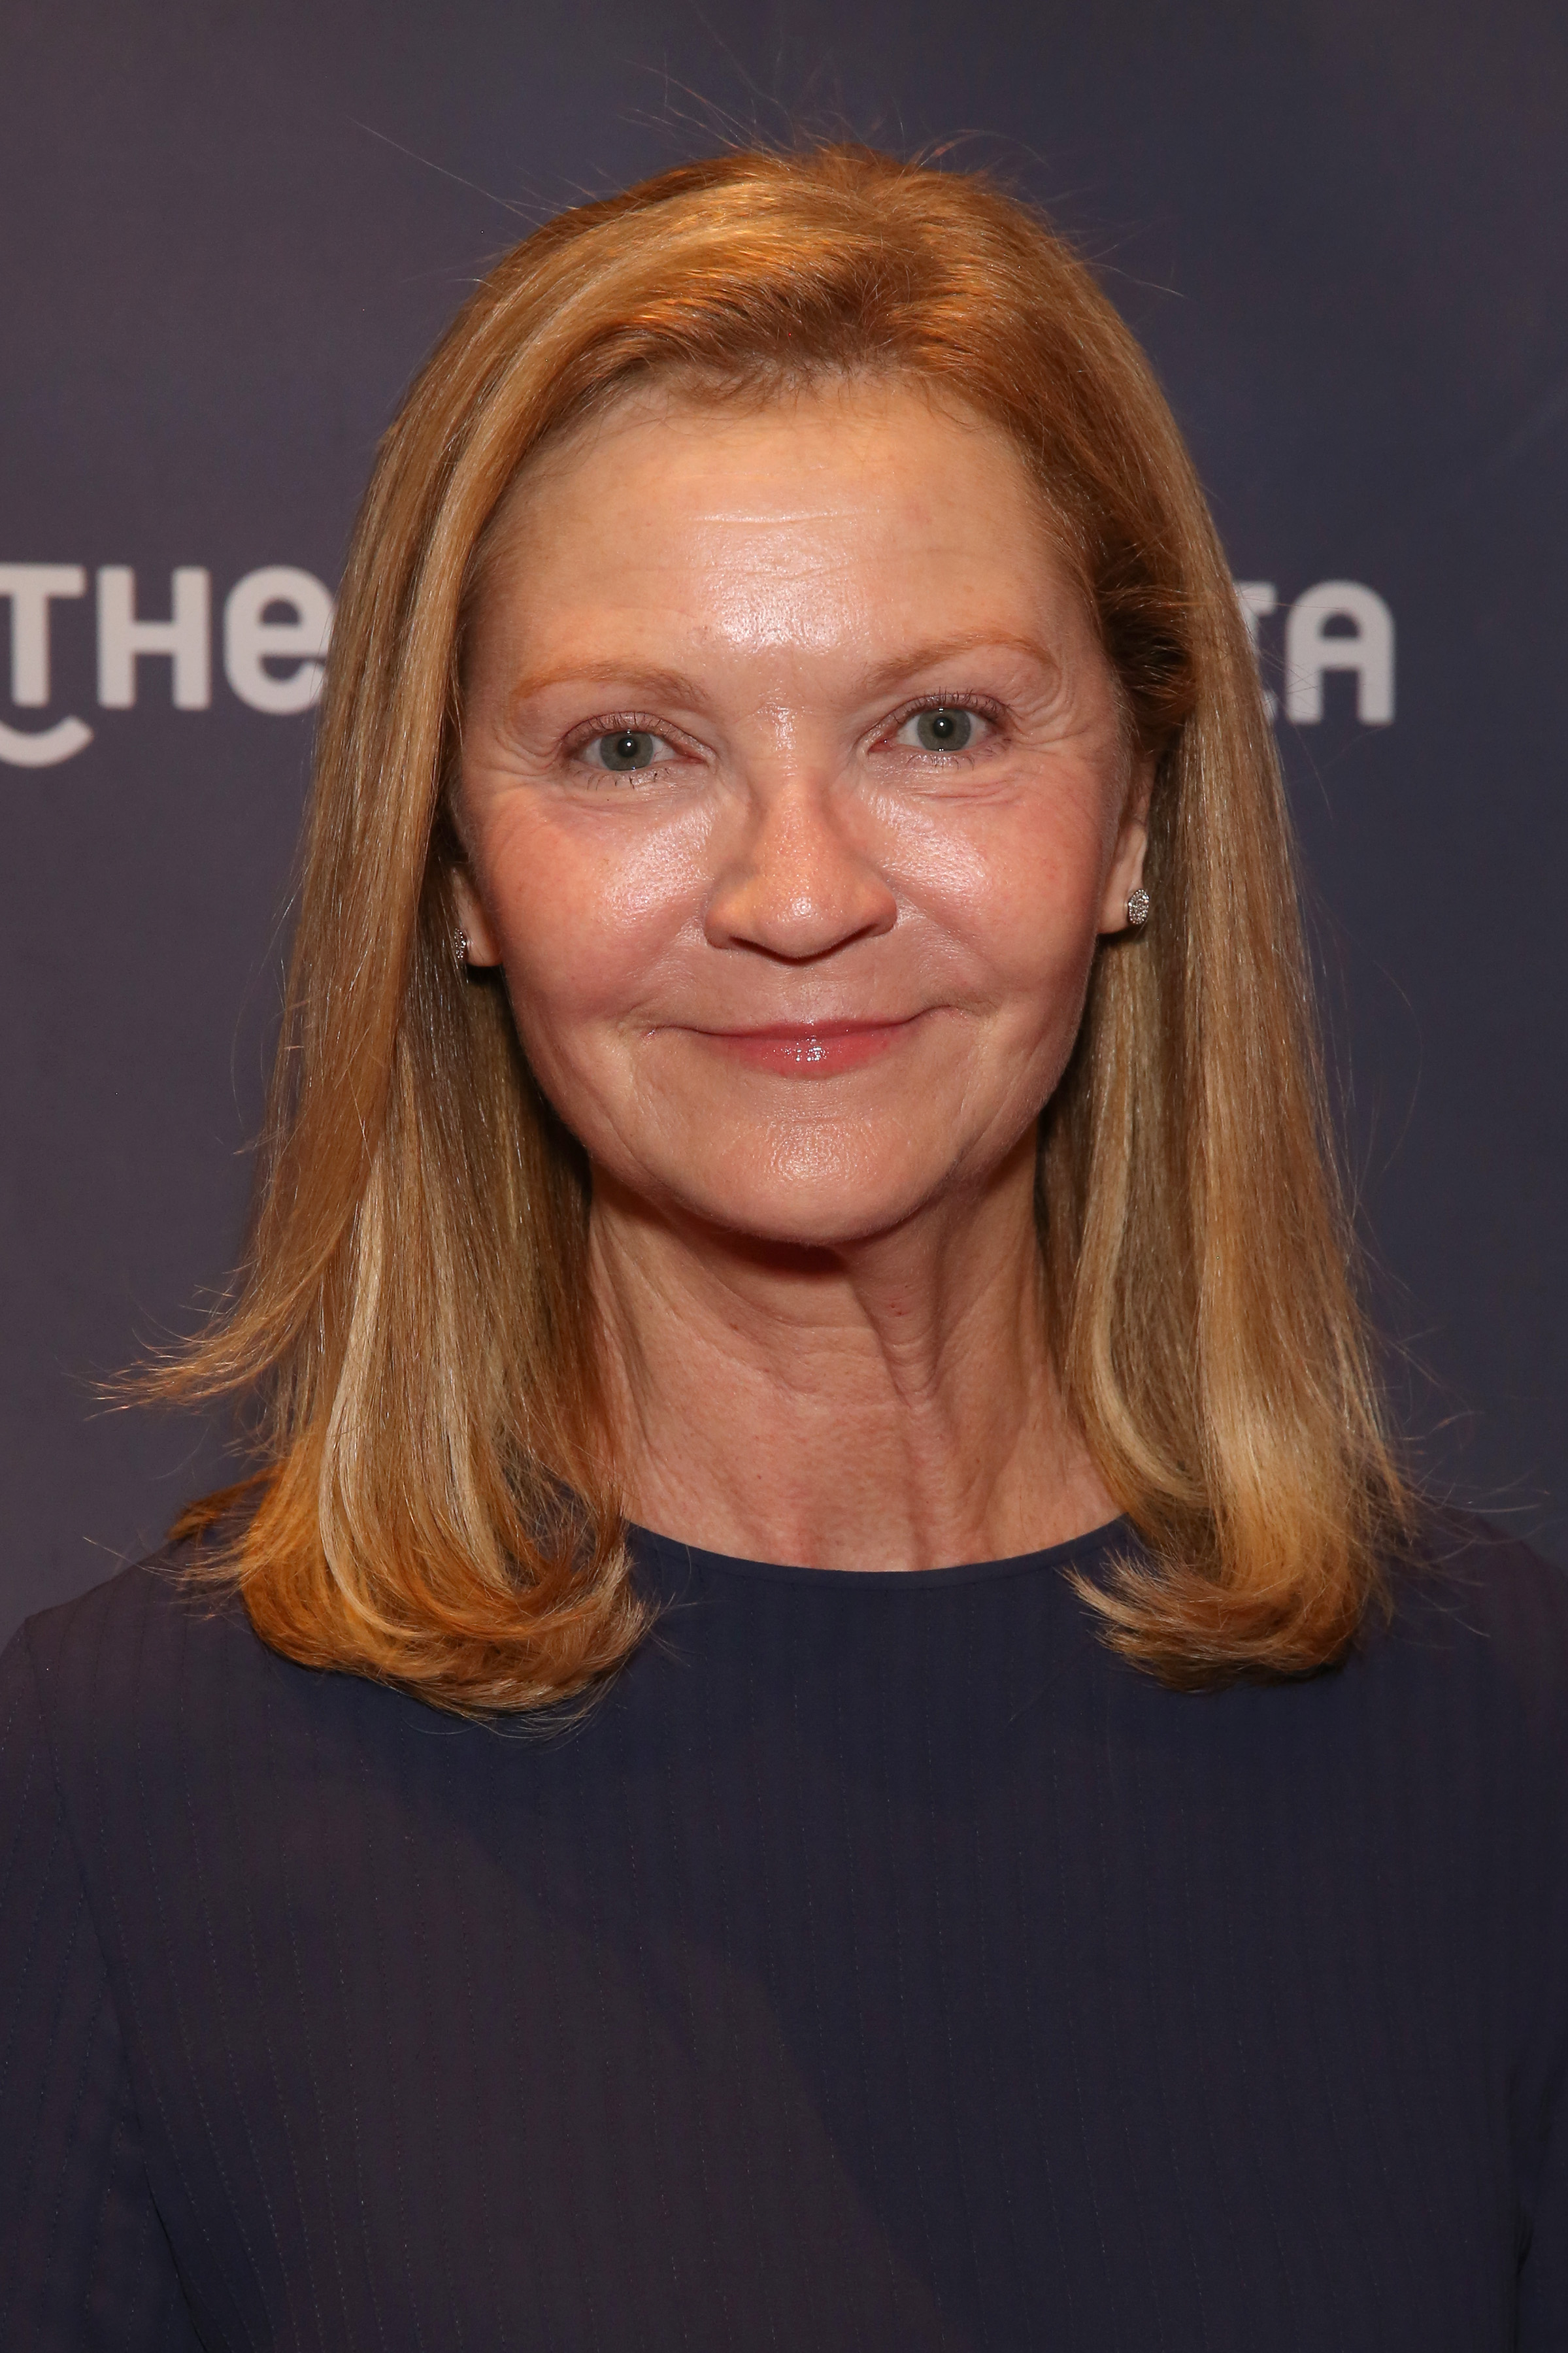 Actress Joan Allen during the arrivals for the 2018 Drama Desk Awards at Town Hall on June 3, 2018 in New York City | Source: Getty Images